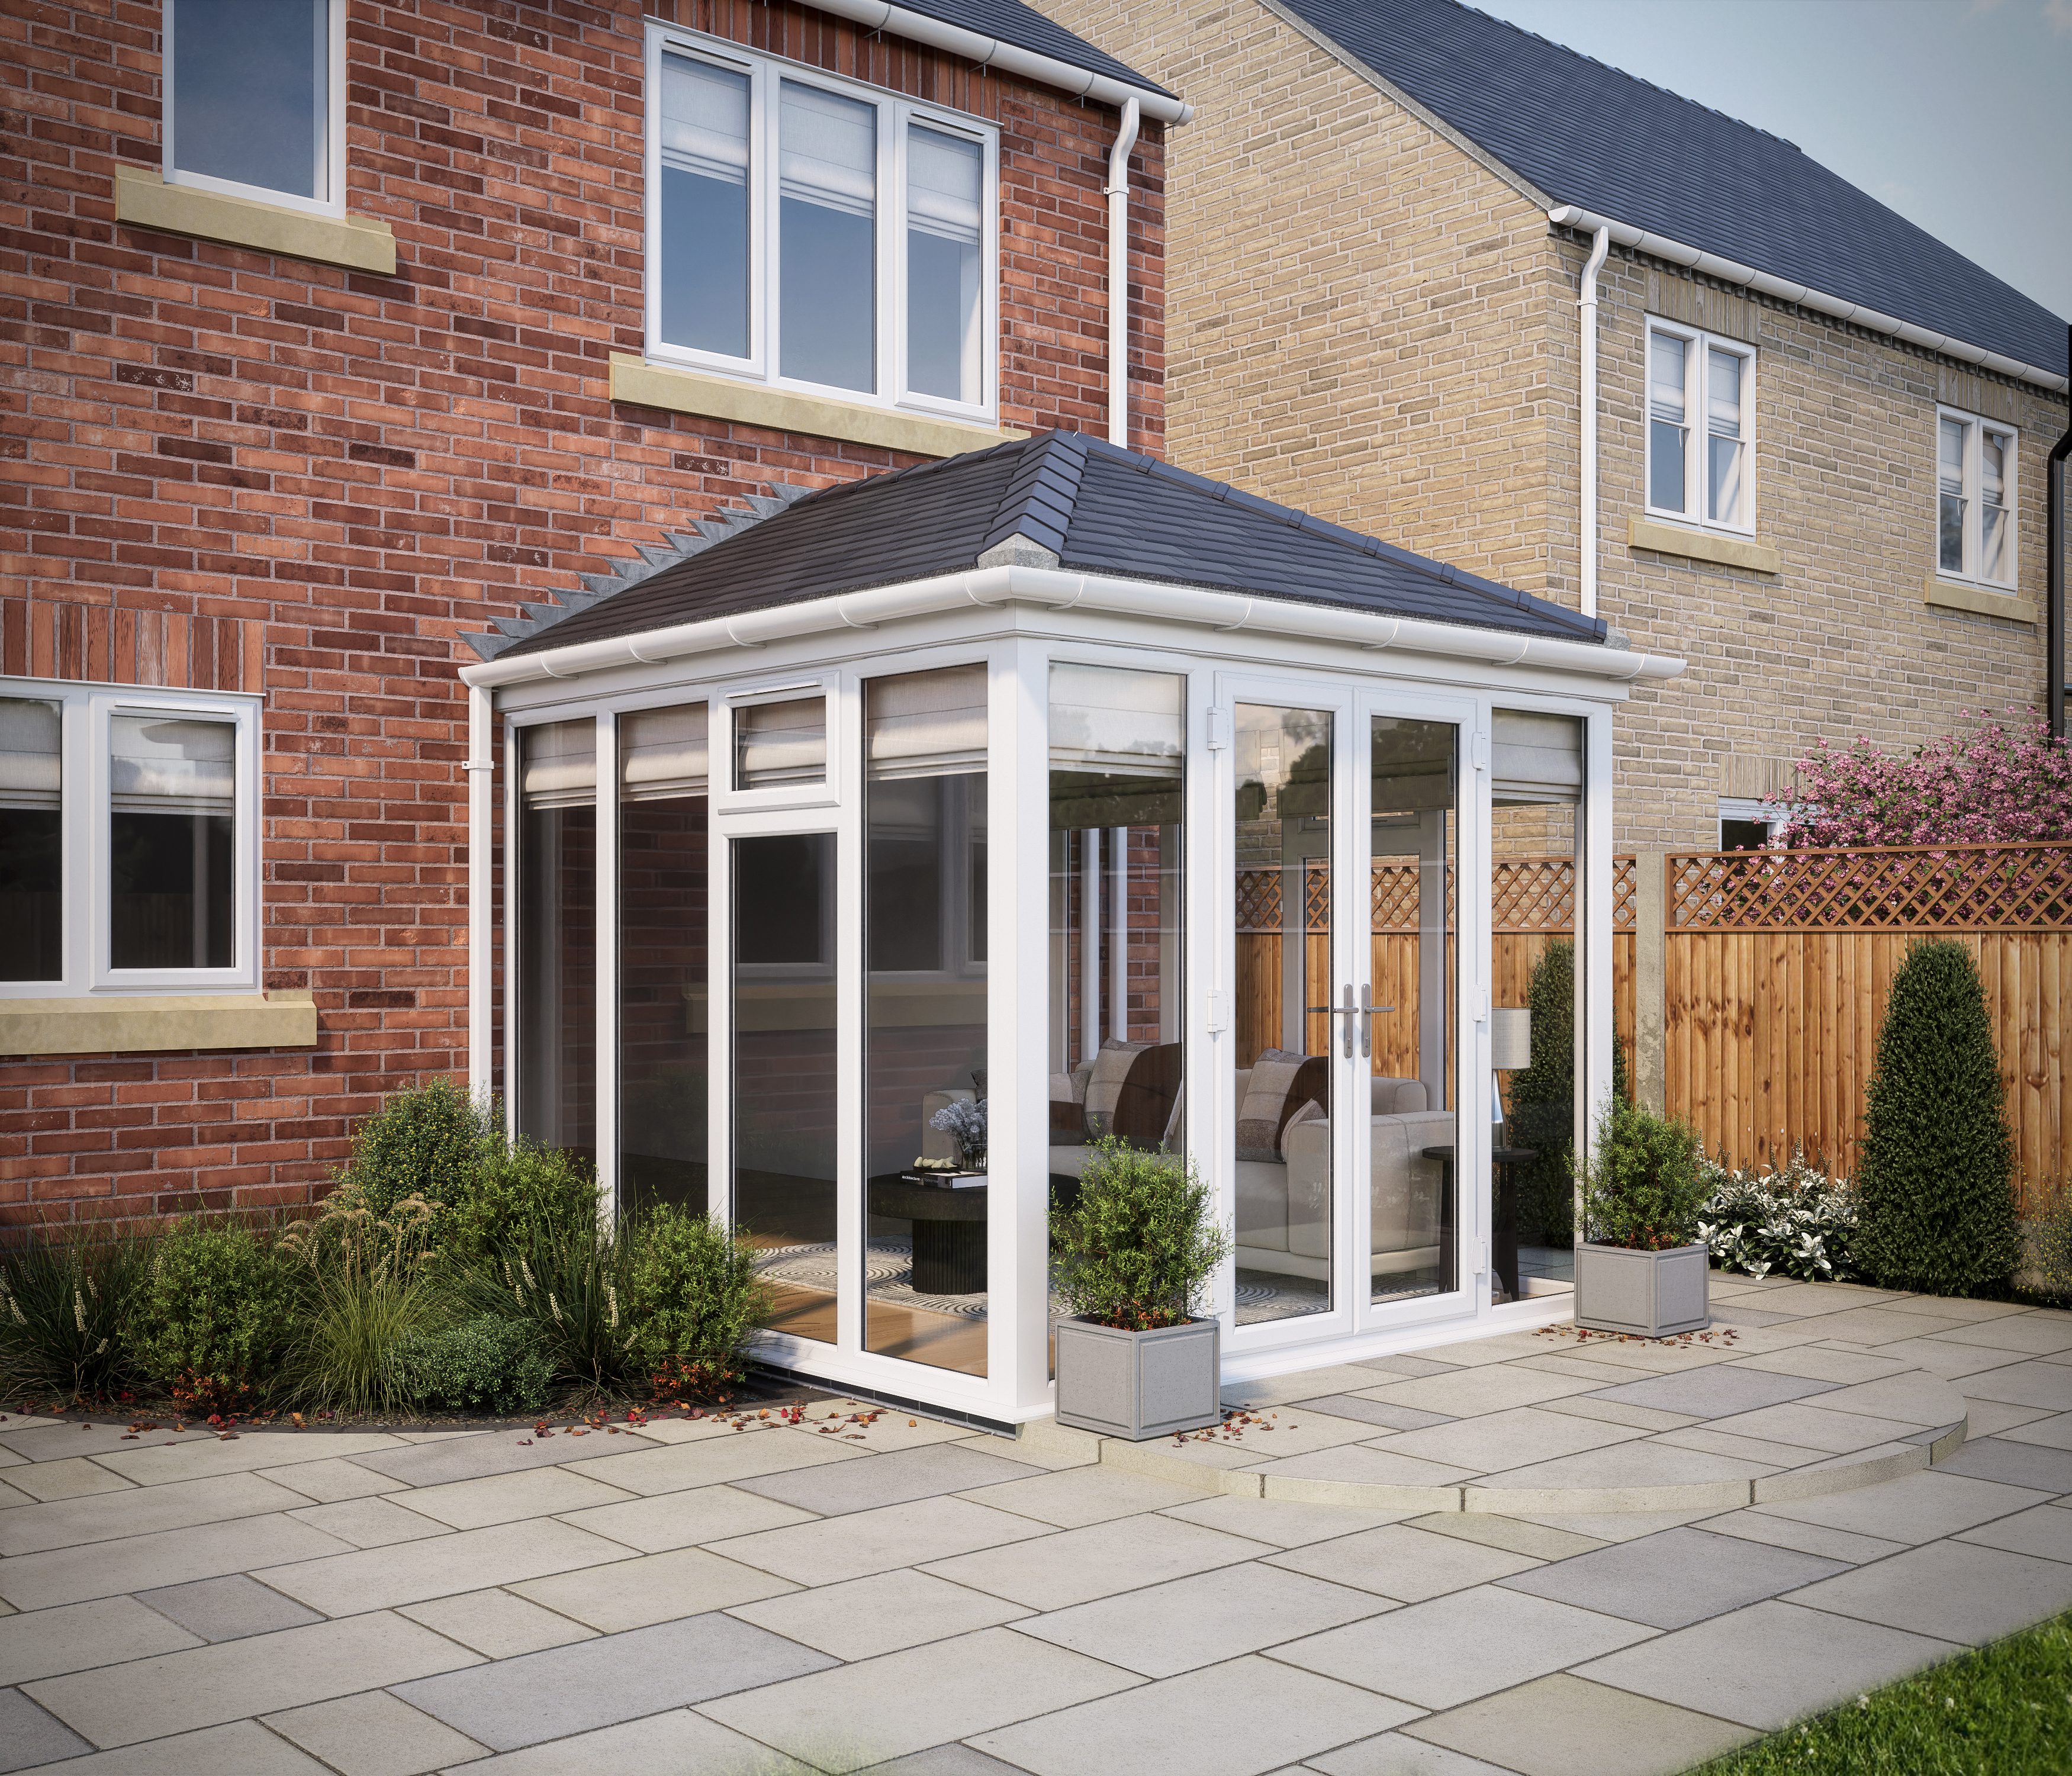 Image of SOLid Roof Full Height Edwardian Conservatory White Frames with Titanium Grey Tiles - 10 x 10ft